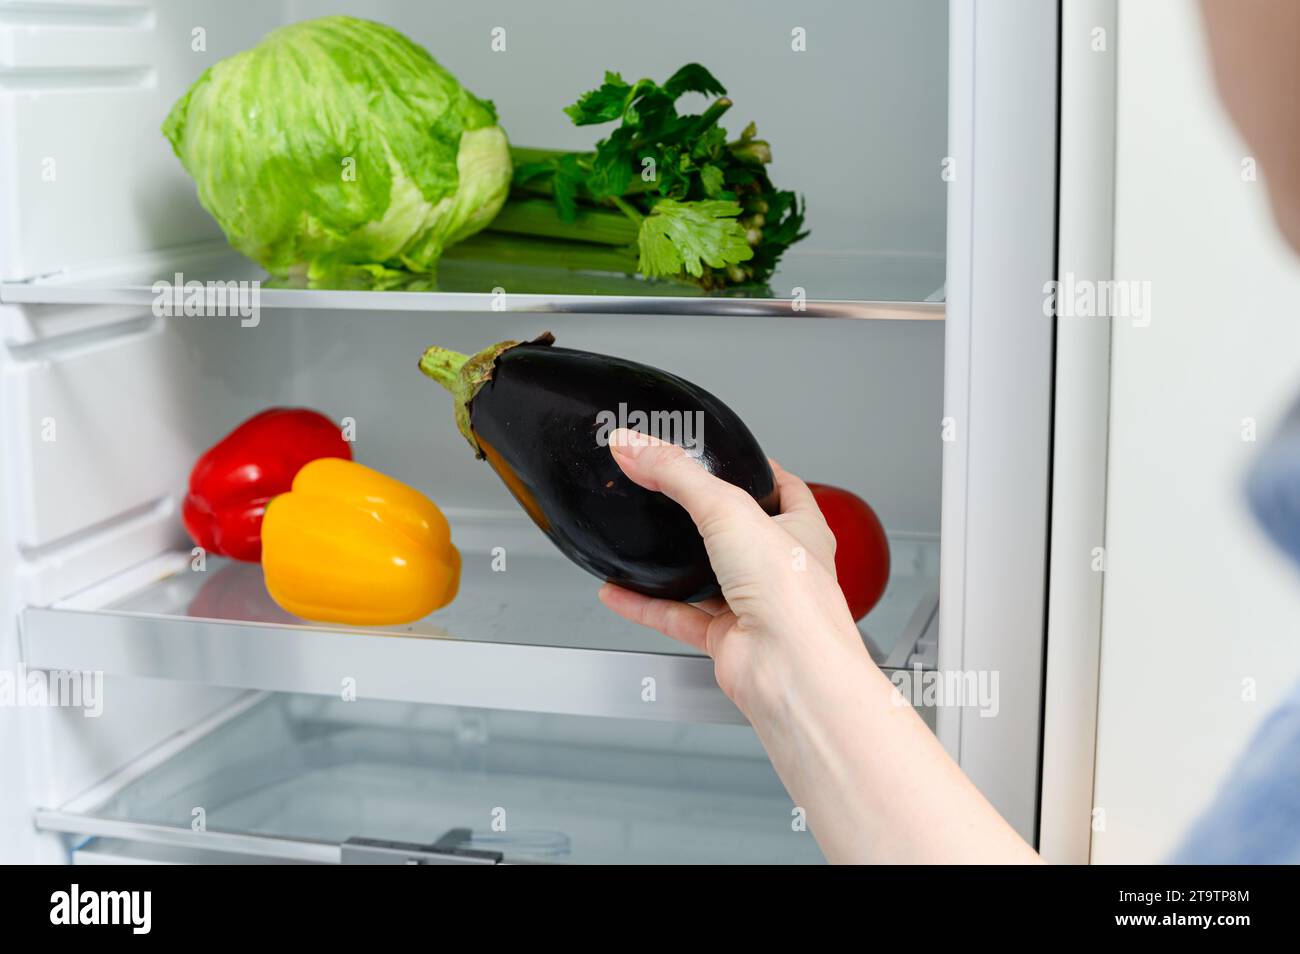 A woman puts an eggplant in the refrigerator. Fresh Vegetables lying on the shelf in the fridge. Stock Photo